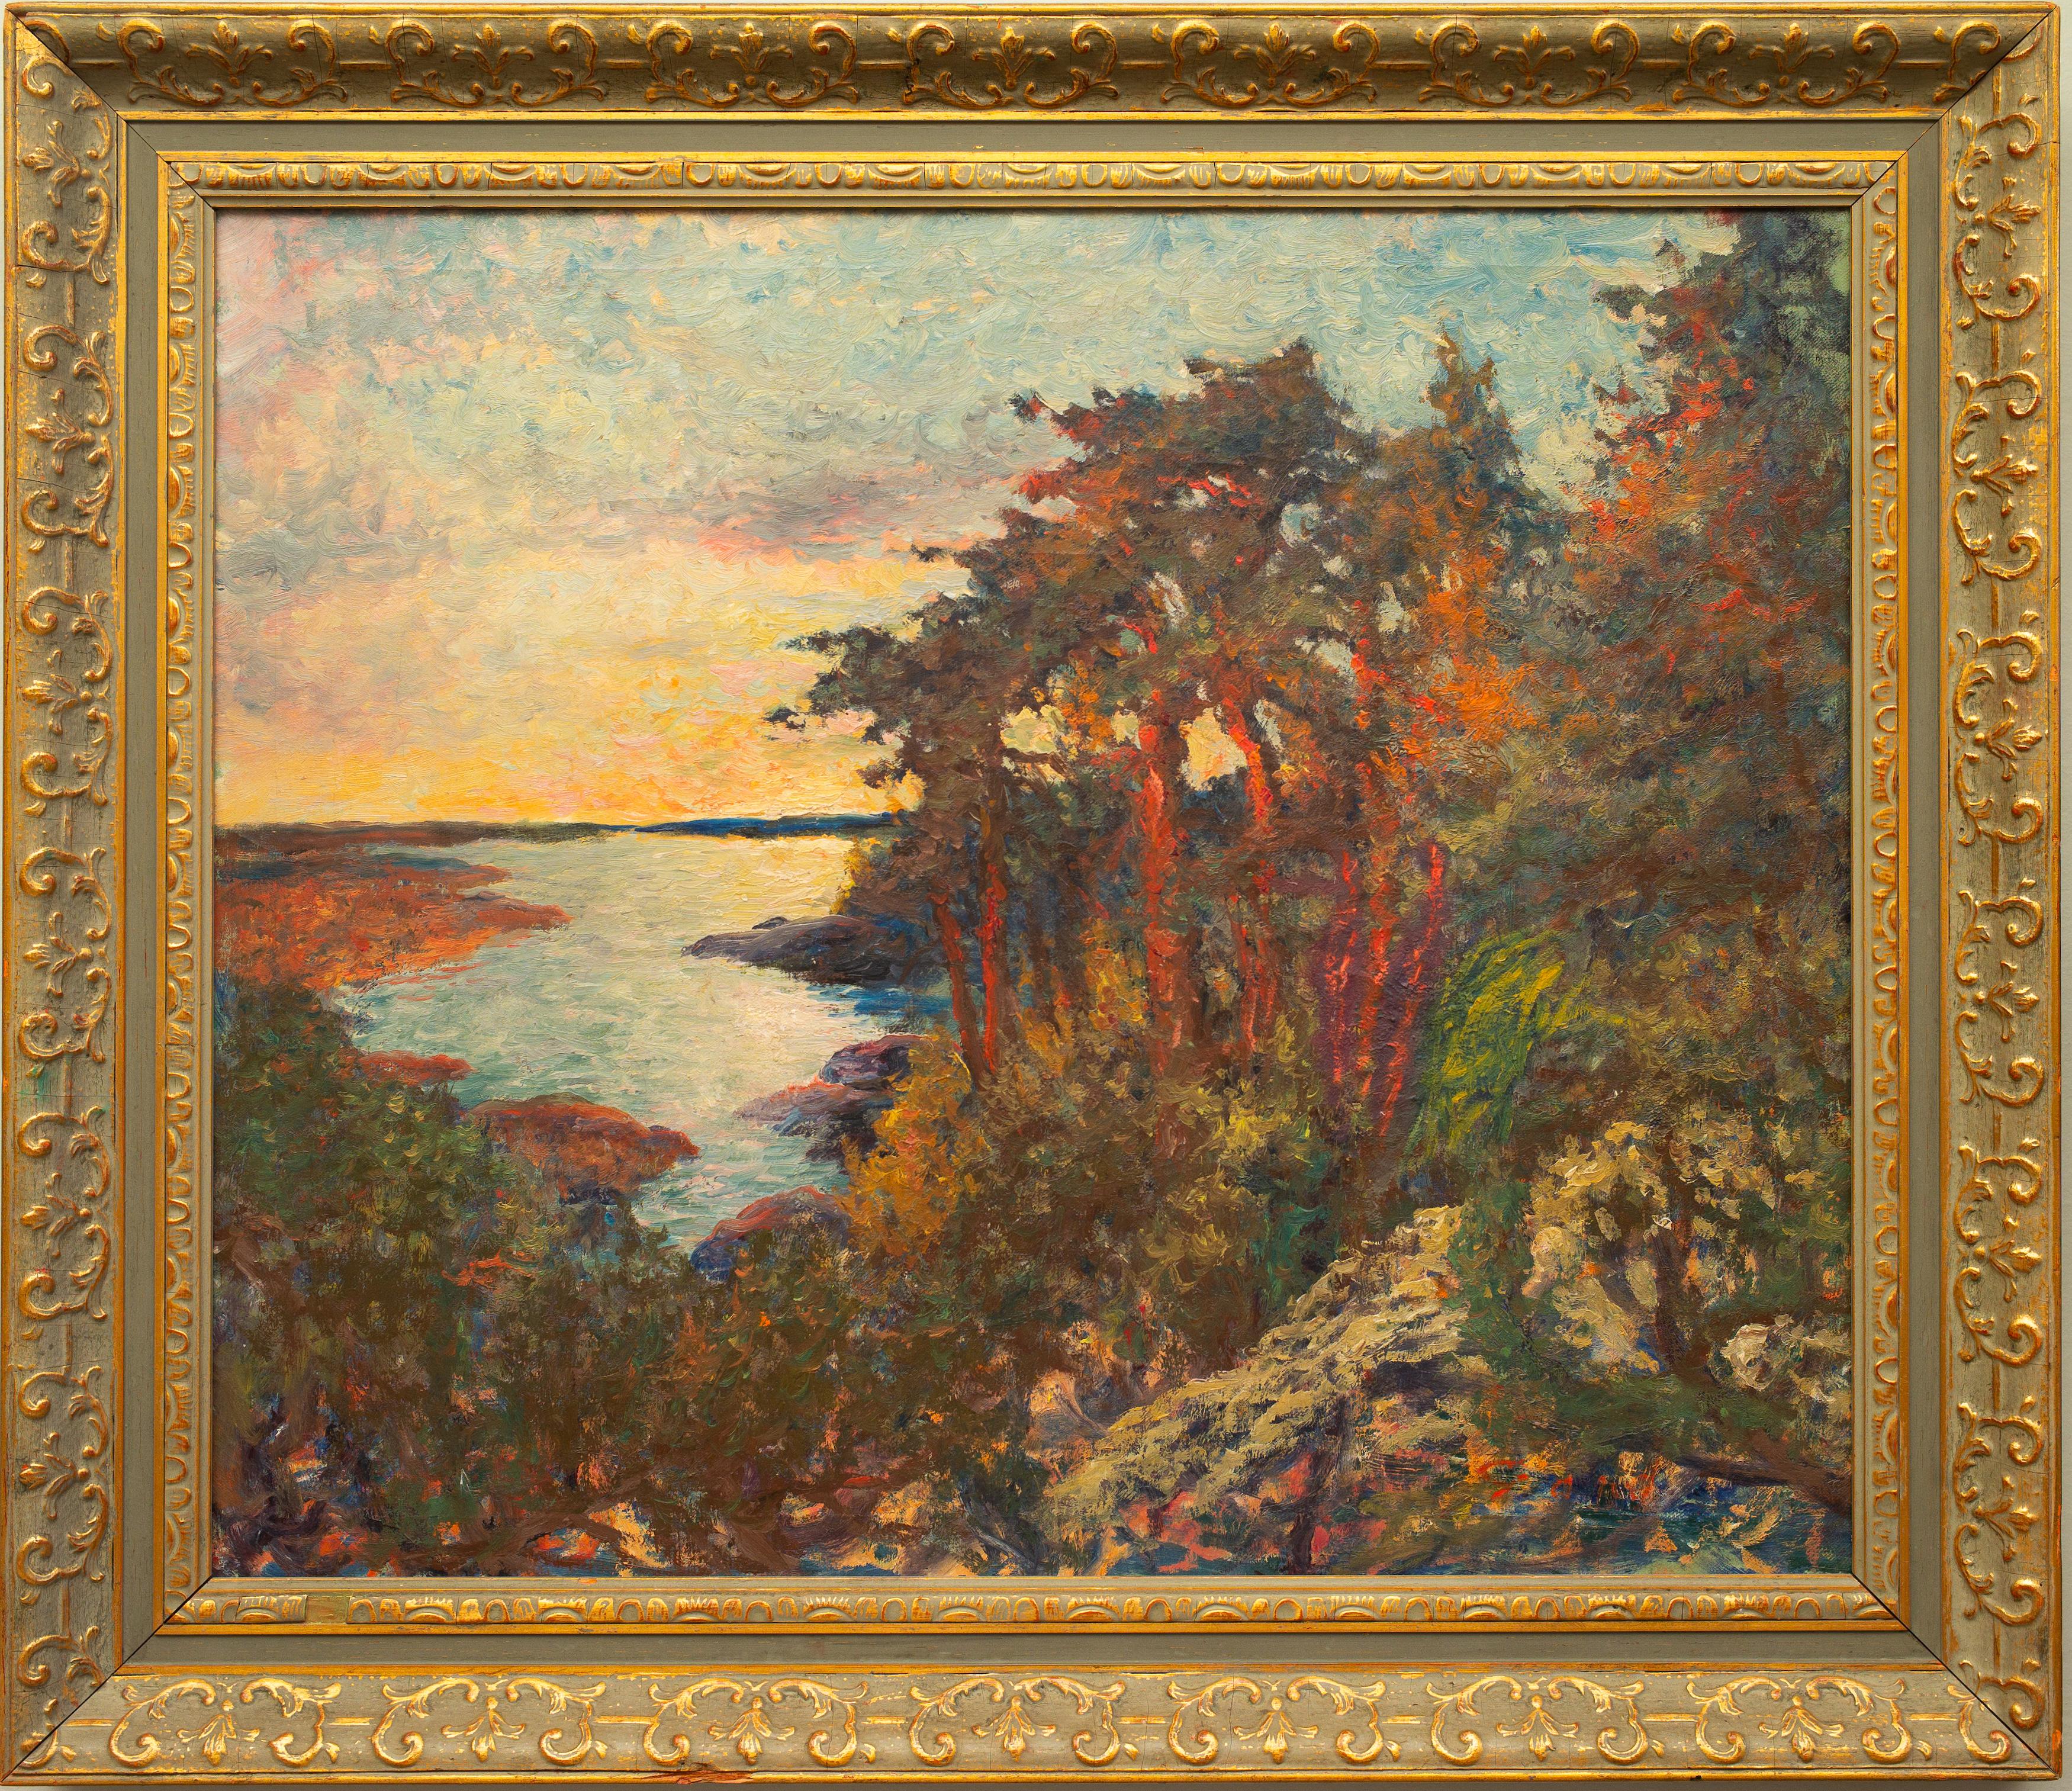 Frans Gard (1892-1978) Swedish

A Scandinavian Archipelago View

oil on canvas
signed on front Gard and Frans Gard a tergo
canvas dimensions 24.40 x 28.74 inches (62 x 73 cm) 
frame 29.92 x 34.64 inches (76 x 88 cm)

Provenance: 
A Swedish Private